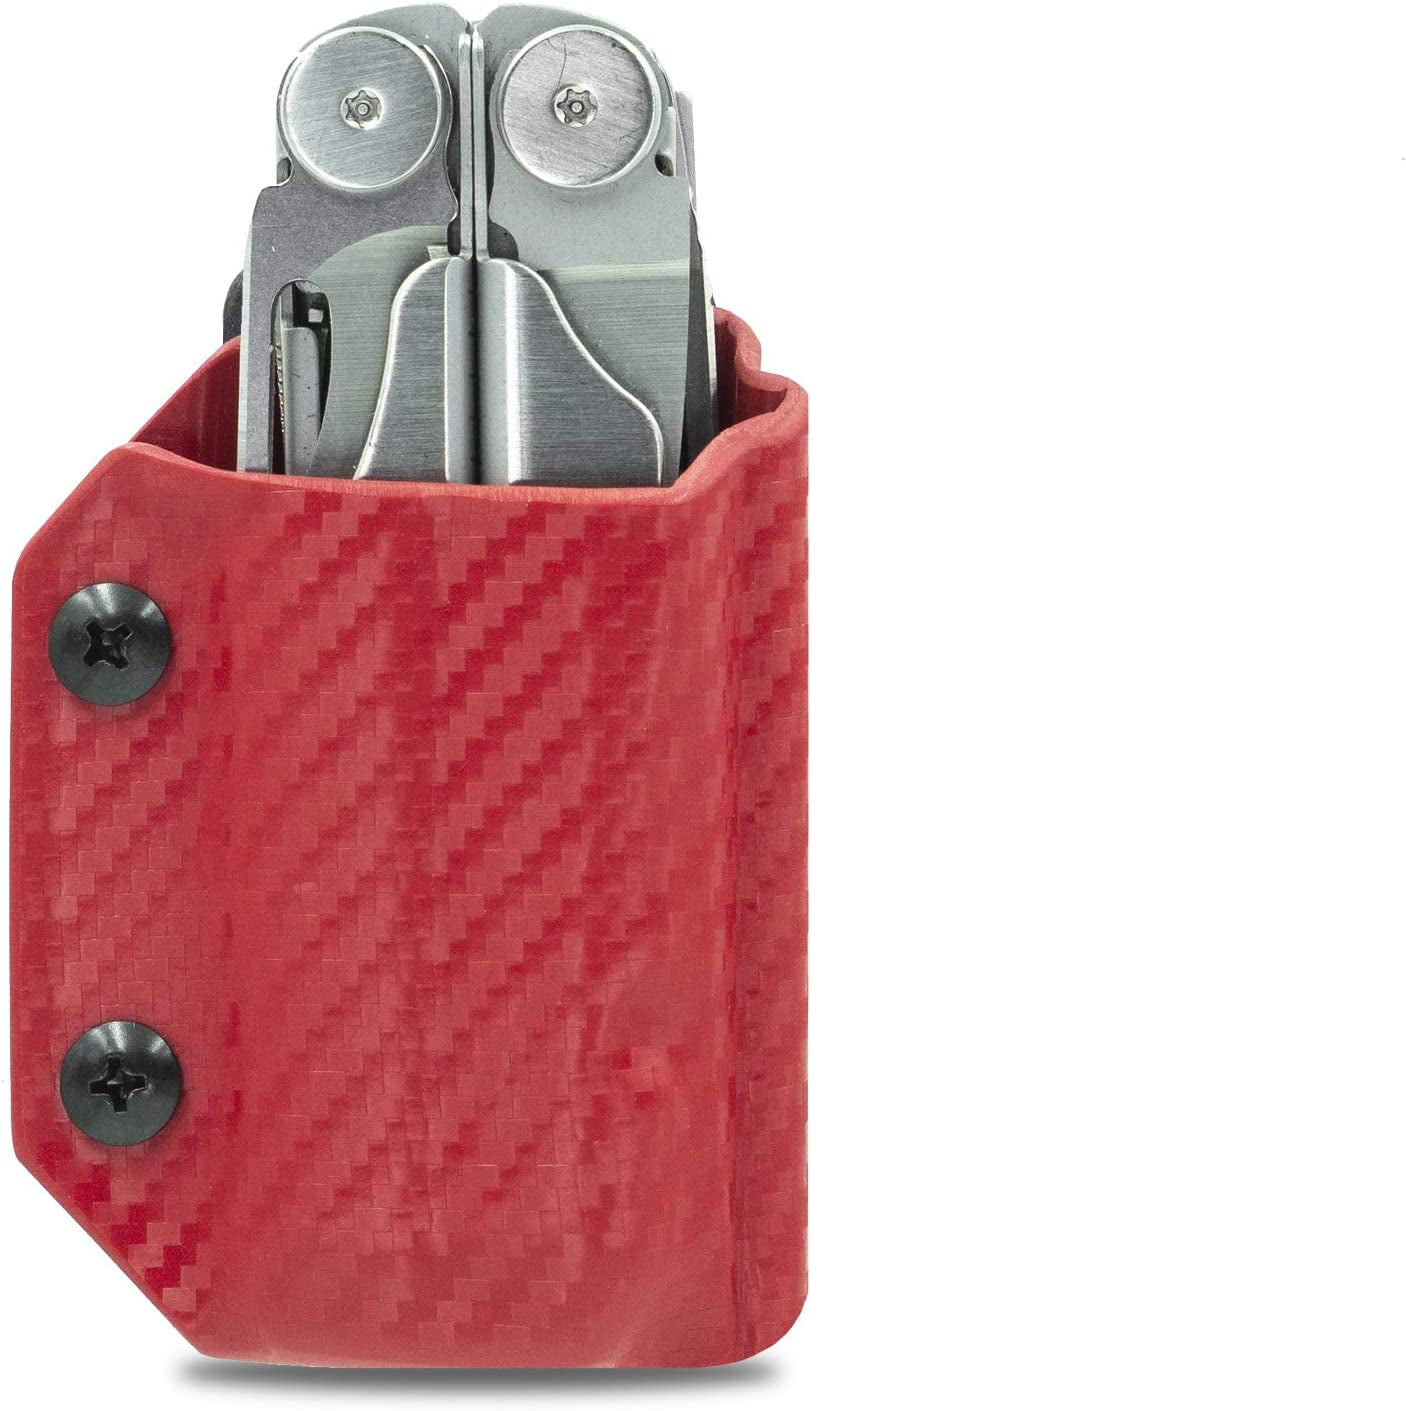 Clip & Carry, Kydex Multitool Sheath for LEATHERMAN WAVE & WAVE + plus - Made in USA - Multi Tool Sheath Holder Cover Belt Pocket Holster - Multi-Tool Not Included (Carbon Fiber Red)